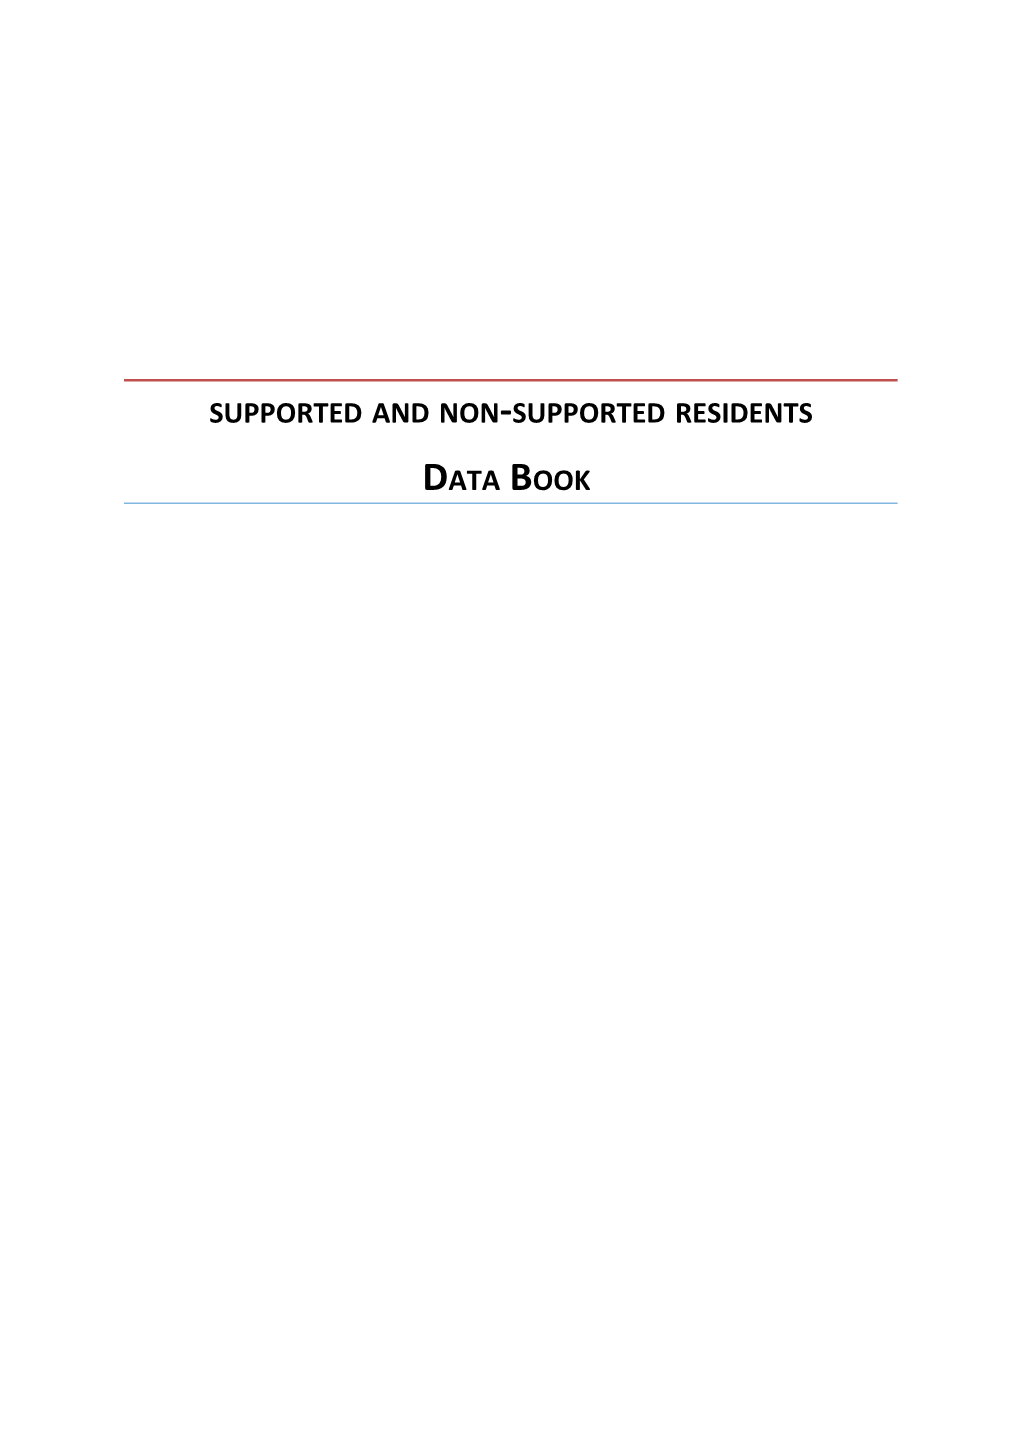 SUPPORTED and NON-SUPPORTED RESIDENTS Data Book